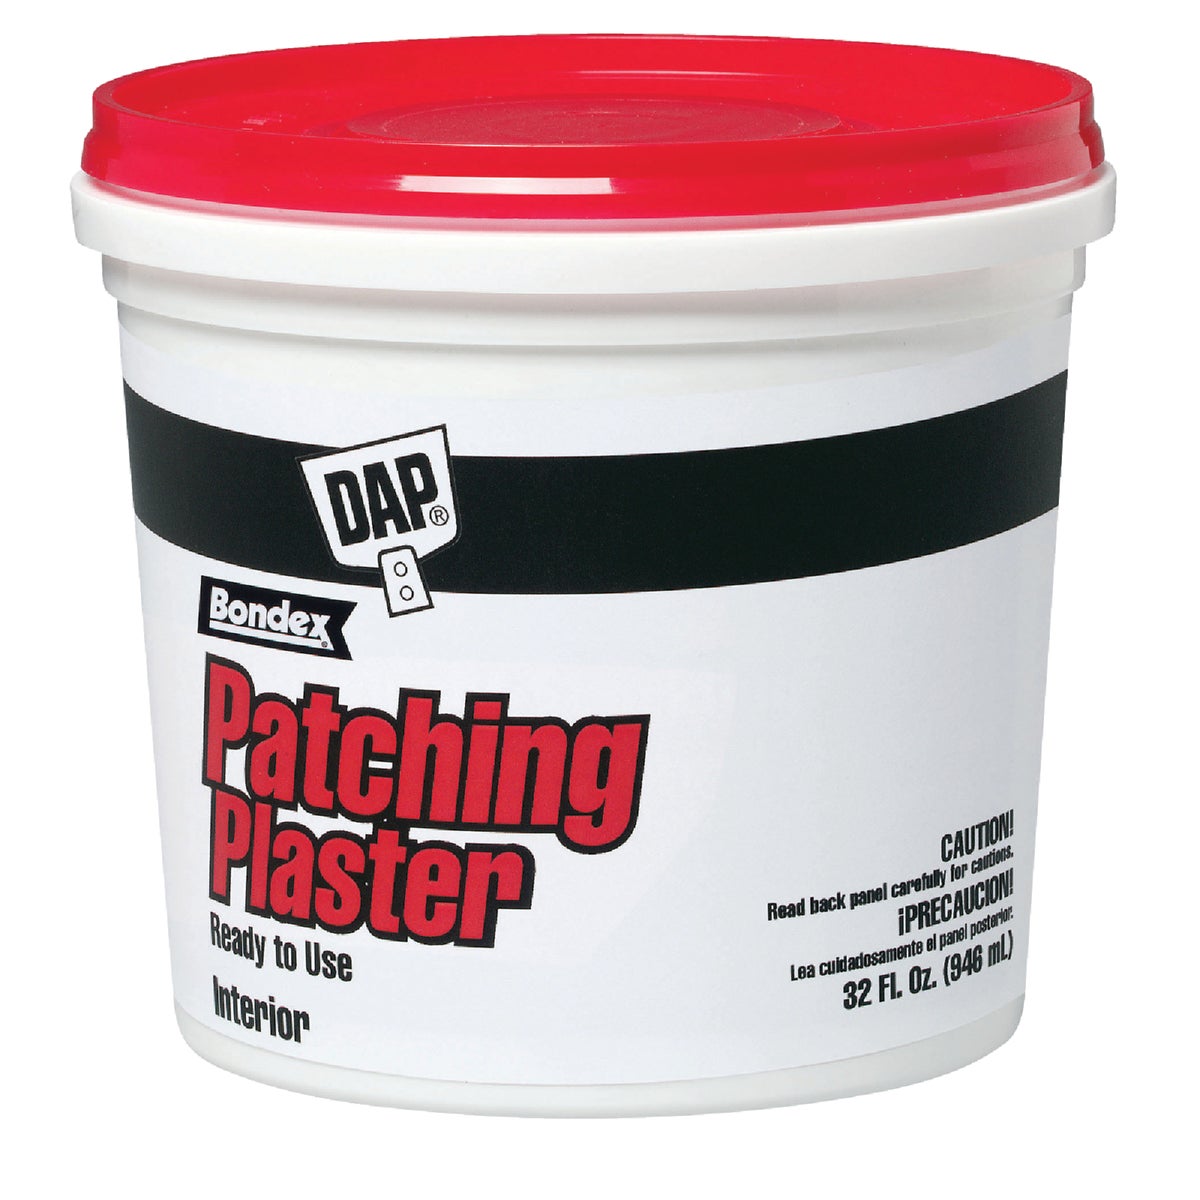 Item 772720, A premixed, value priced, gypsum-based plaster patching product for 